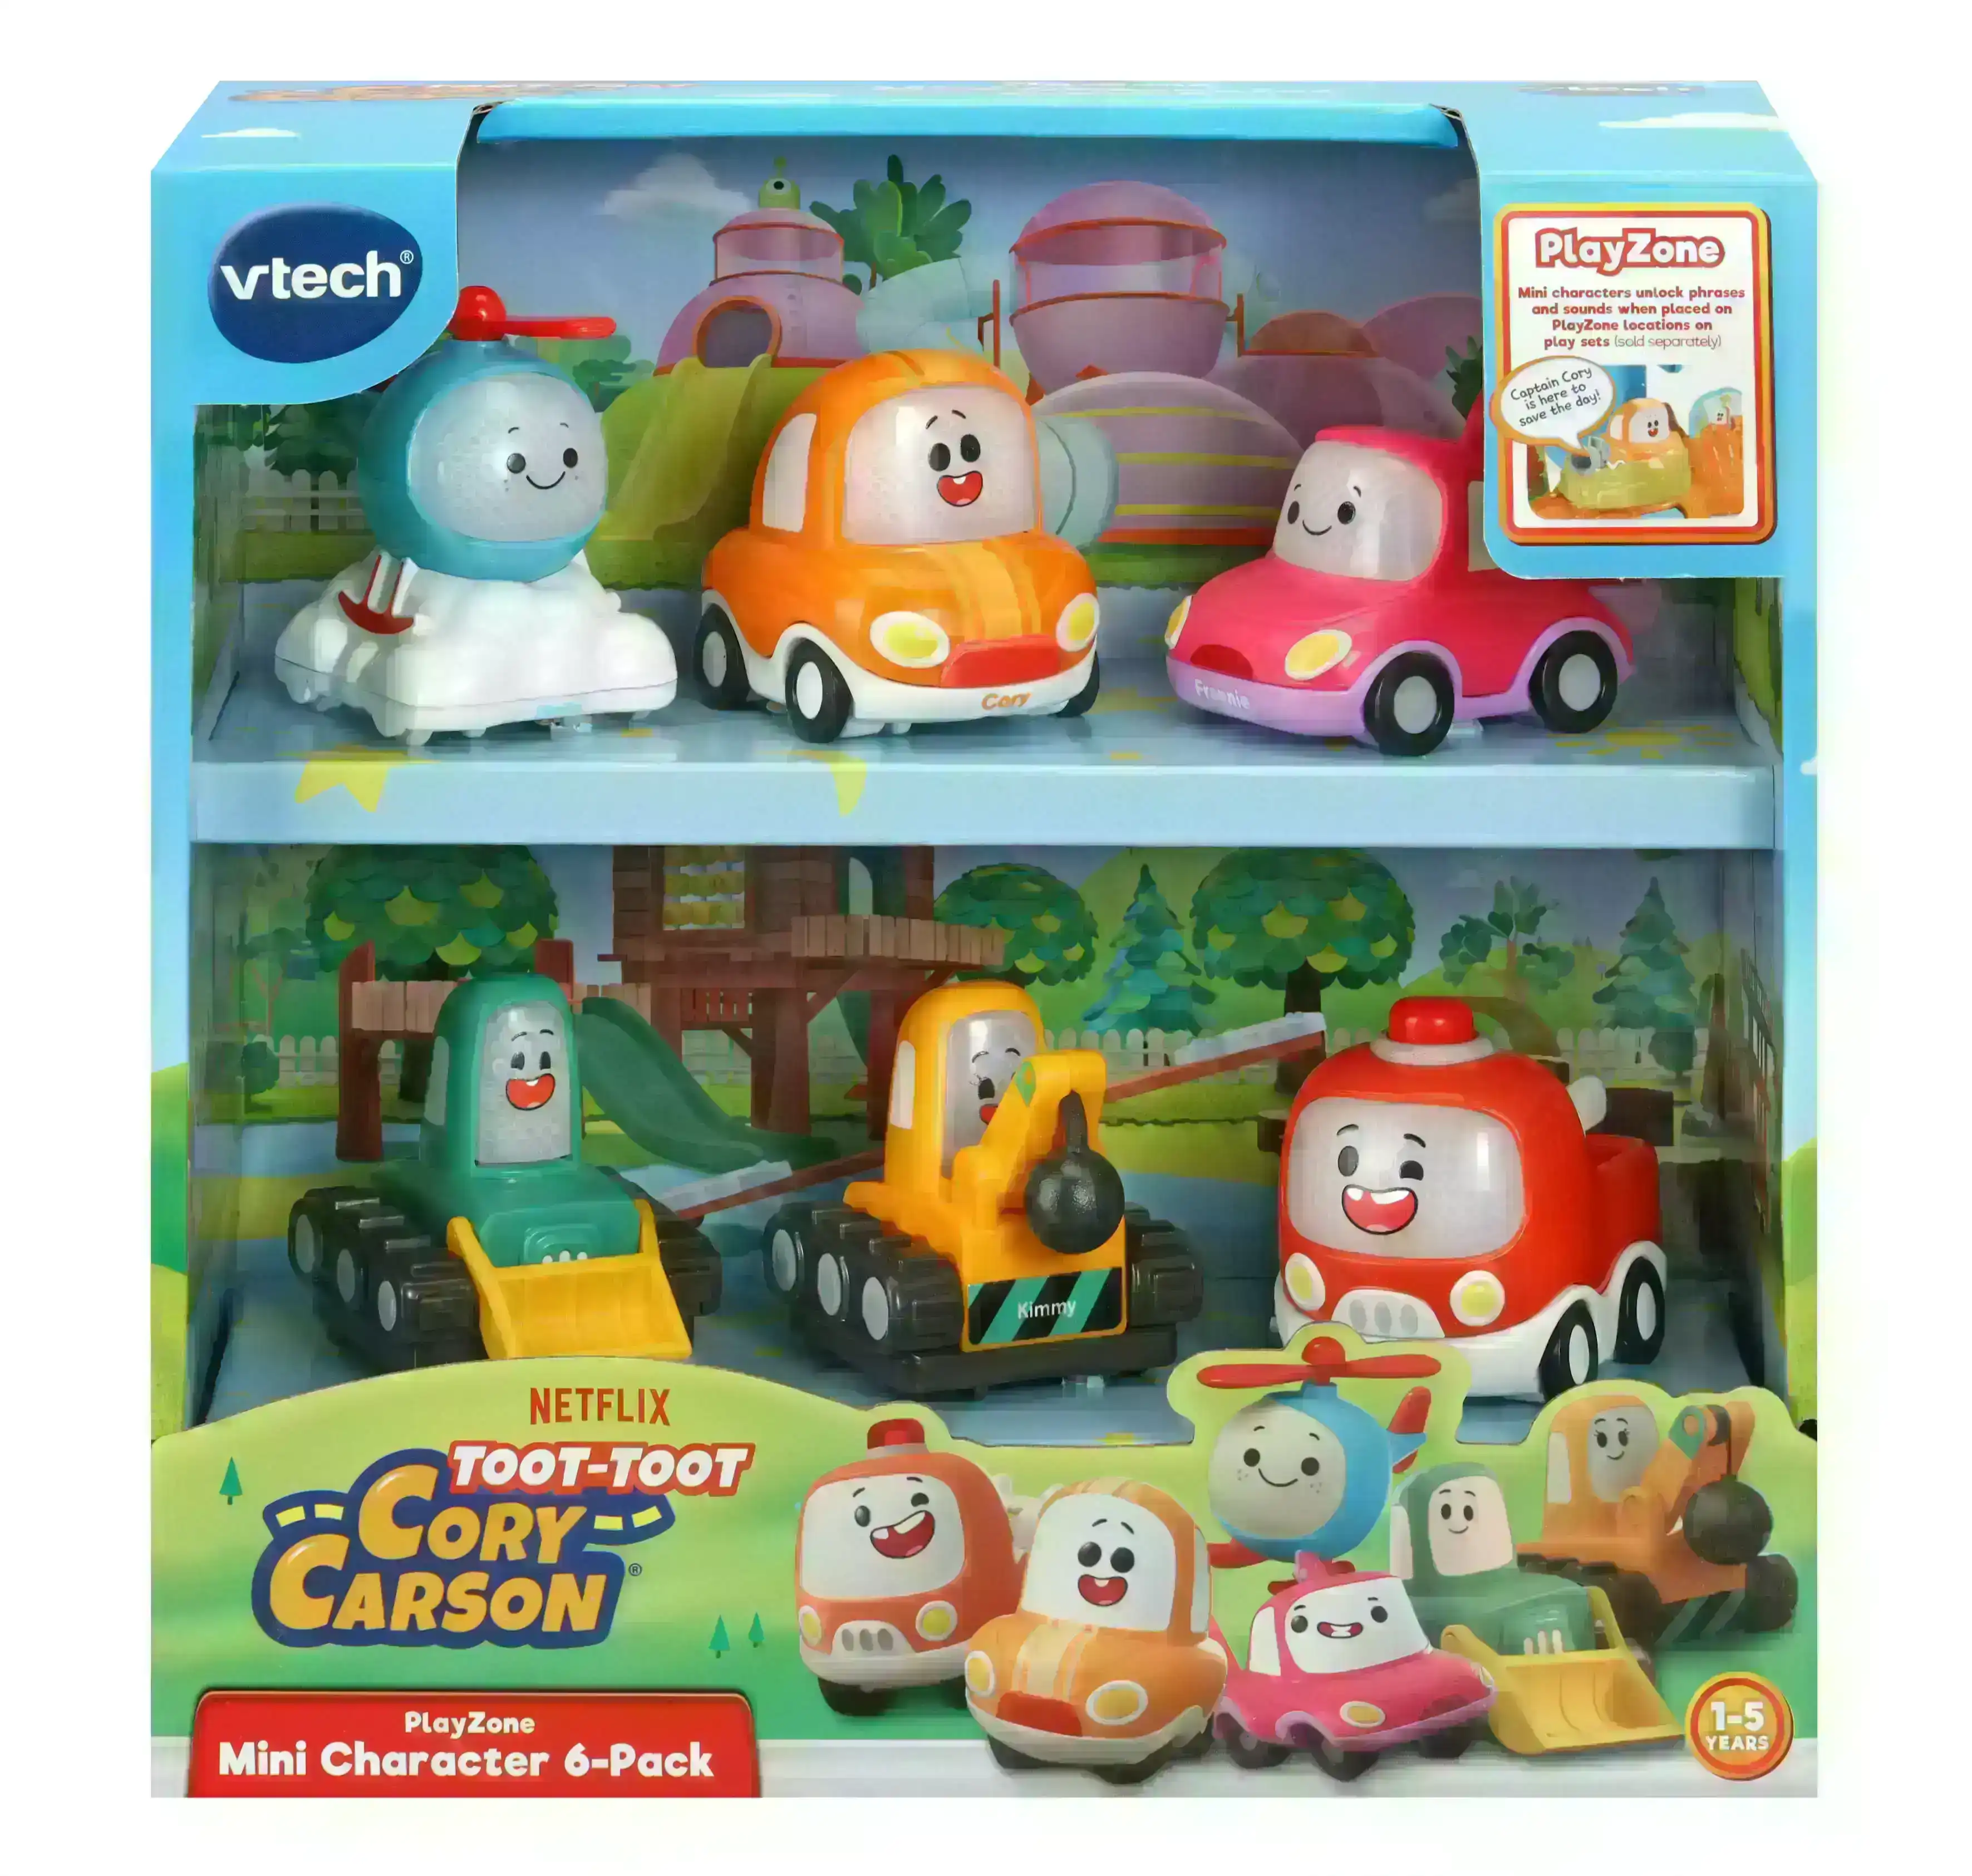 VTech Toot-Toot Cory Carson Playzone Mini Character 6 Pack